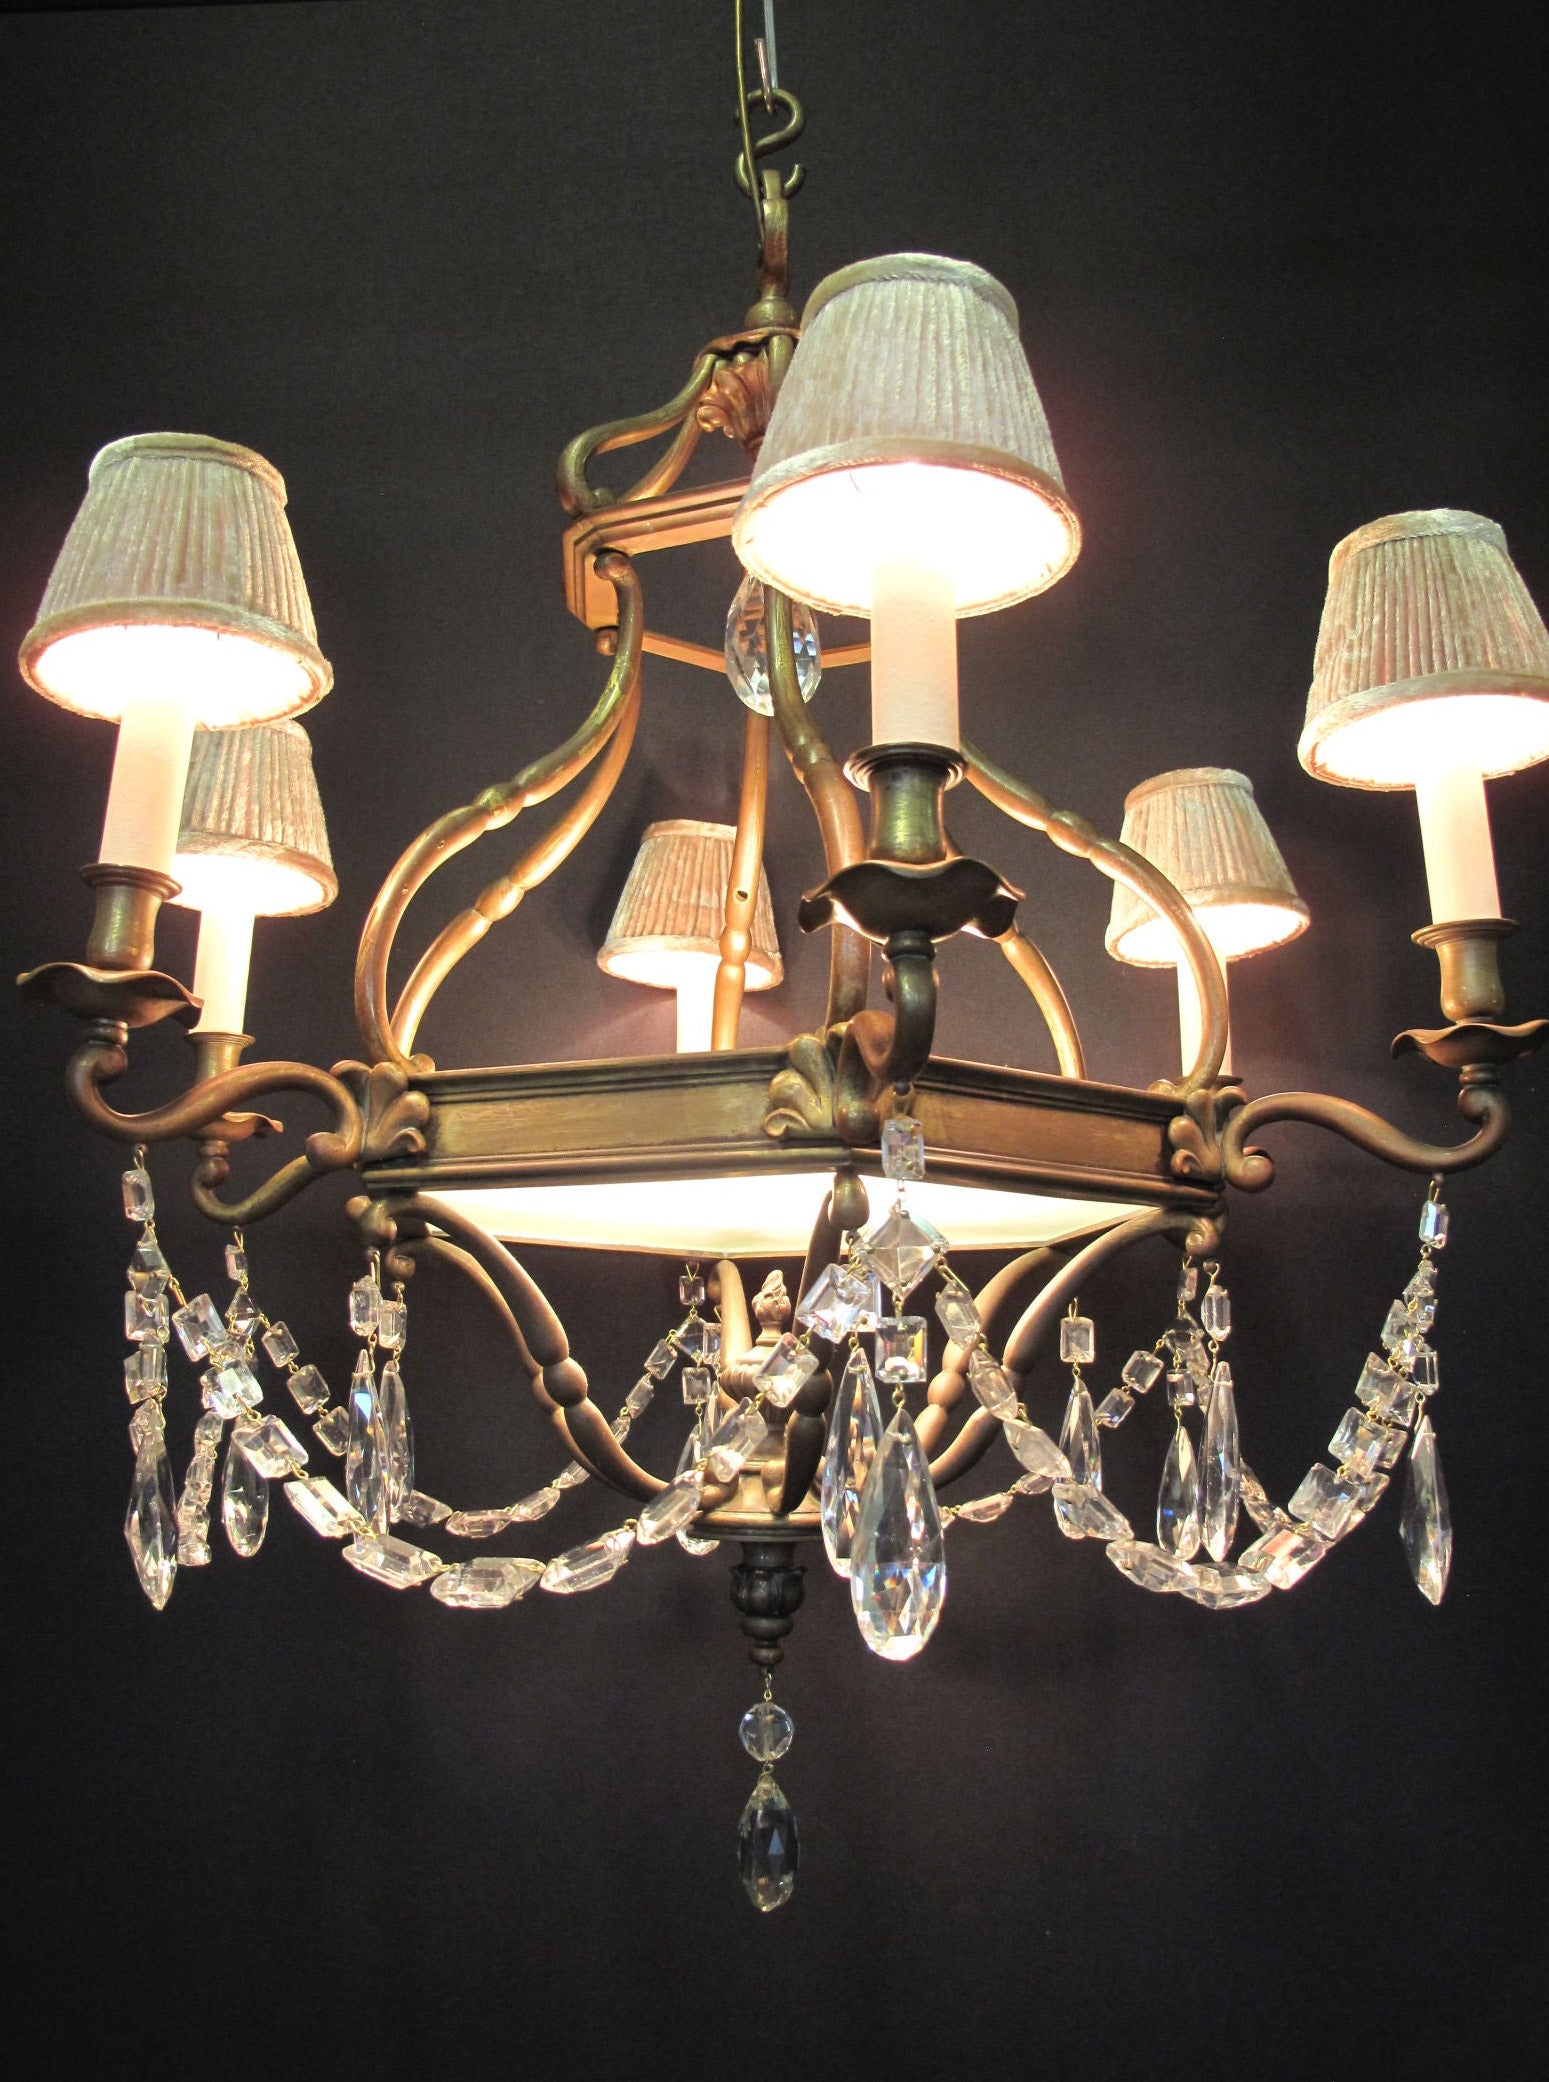 chandelier lit with shades attached